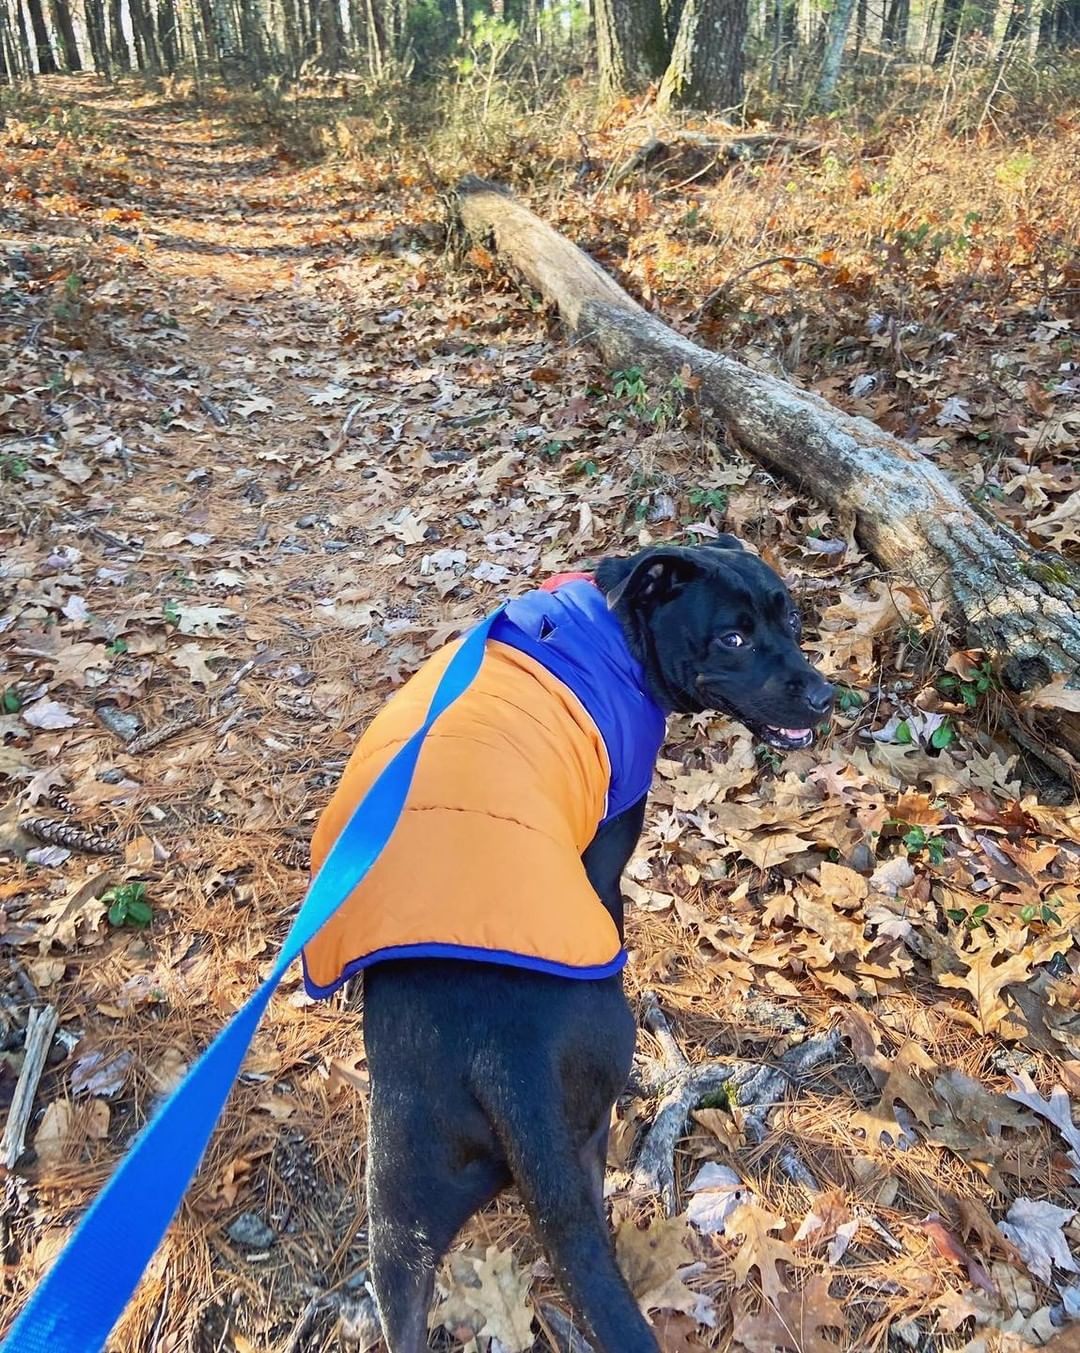 Our handsome 🐾Rescue Dog of the Week🐾 Bo went on a nice nature walk yesterday! He was so excited to spend some time in the woods with his friend…I mean look at that smile! Bo would love to have a family of his own to snuggle, love in, and go on nature walks with. He can’t wait to help his future home walk off that extra turkey weight!😉

🐾Please share🐾

<a target='_blank' href='https://www.instagram.com/explore/tags/darbsterdoggy/'>#darbsterdoggy</a> <a target='_blank' href='https://www.instagram.com/explore/tags/darbsterfoundation/'>#darbsterfoundation</a> <a target='_blank' href='https://www.instagram.com/explore/tags/opttoadopt/'>#opttoadopt</a> <a target='_blank' href='https://www.instagram.com/explore/tags/rescuedogsofinstagram/'>#rescuedogsofinstagram</a> <a target='_blank' href='https://www.instagram.com/explore/tags/rescuedismyfavoritebreed/'>#rescuedismyfavoritebreed</a> <a target='_blank' href='https://www.instagram.com/explore/tags/rescuedogoftheweek/'>#rescuedogoftheweek</a>